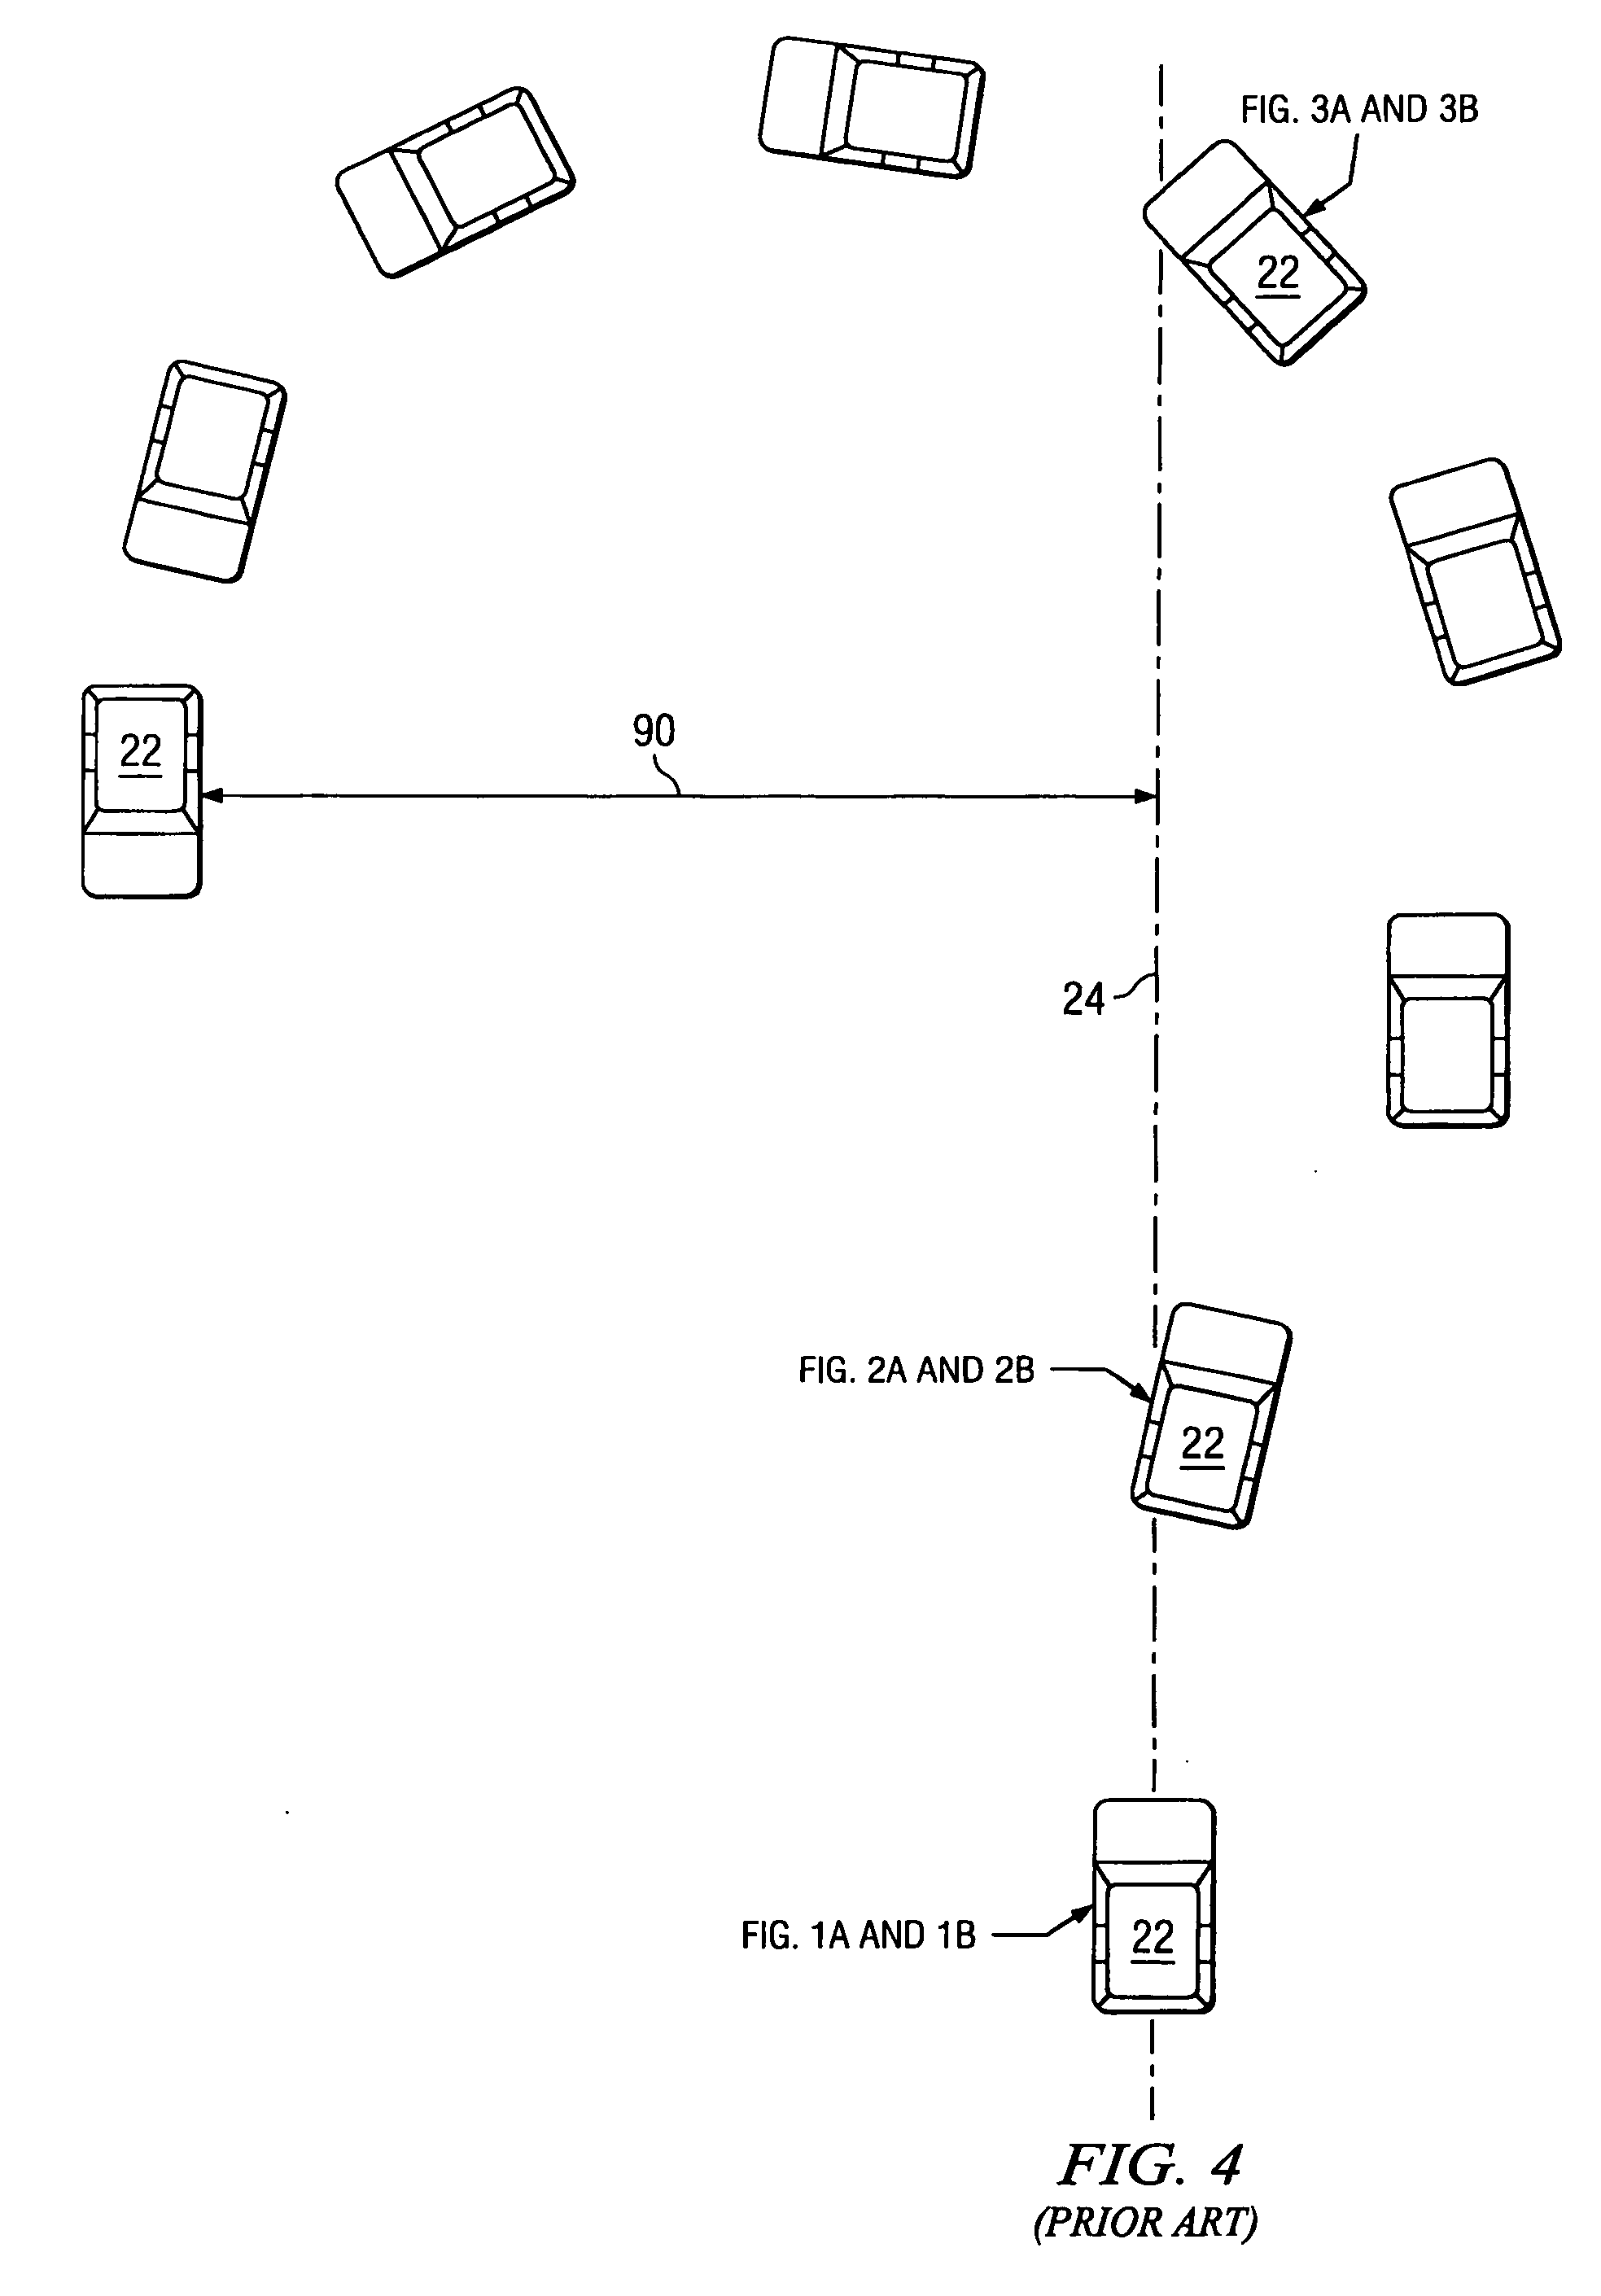 Methods of improving stability of a vehicle using a vehicle stability control system